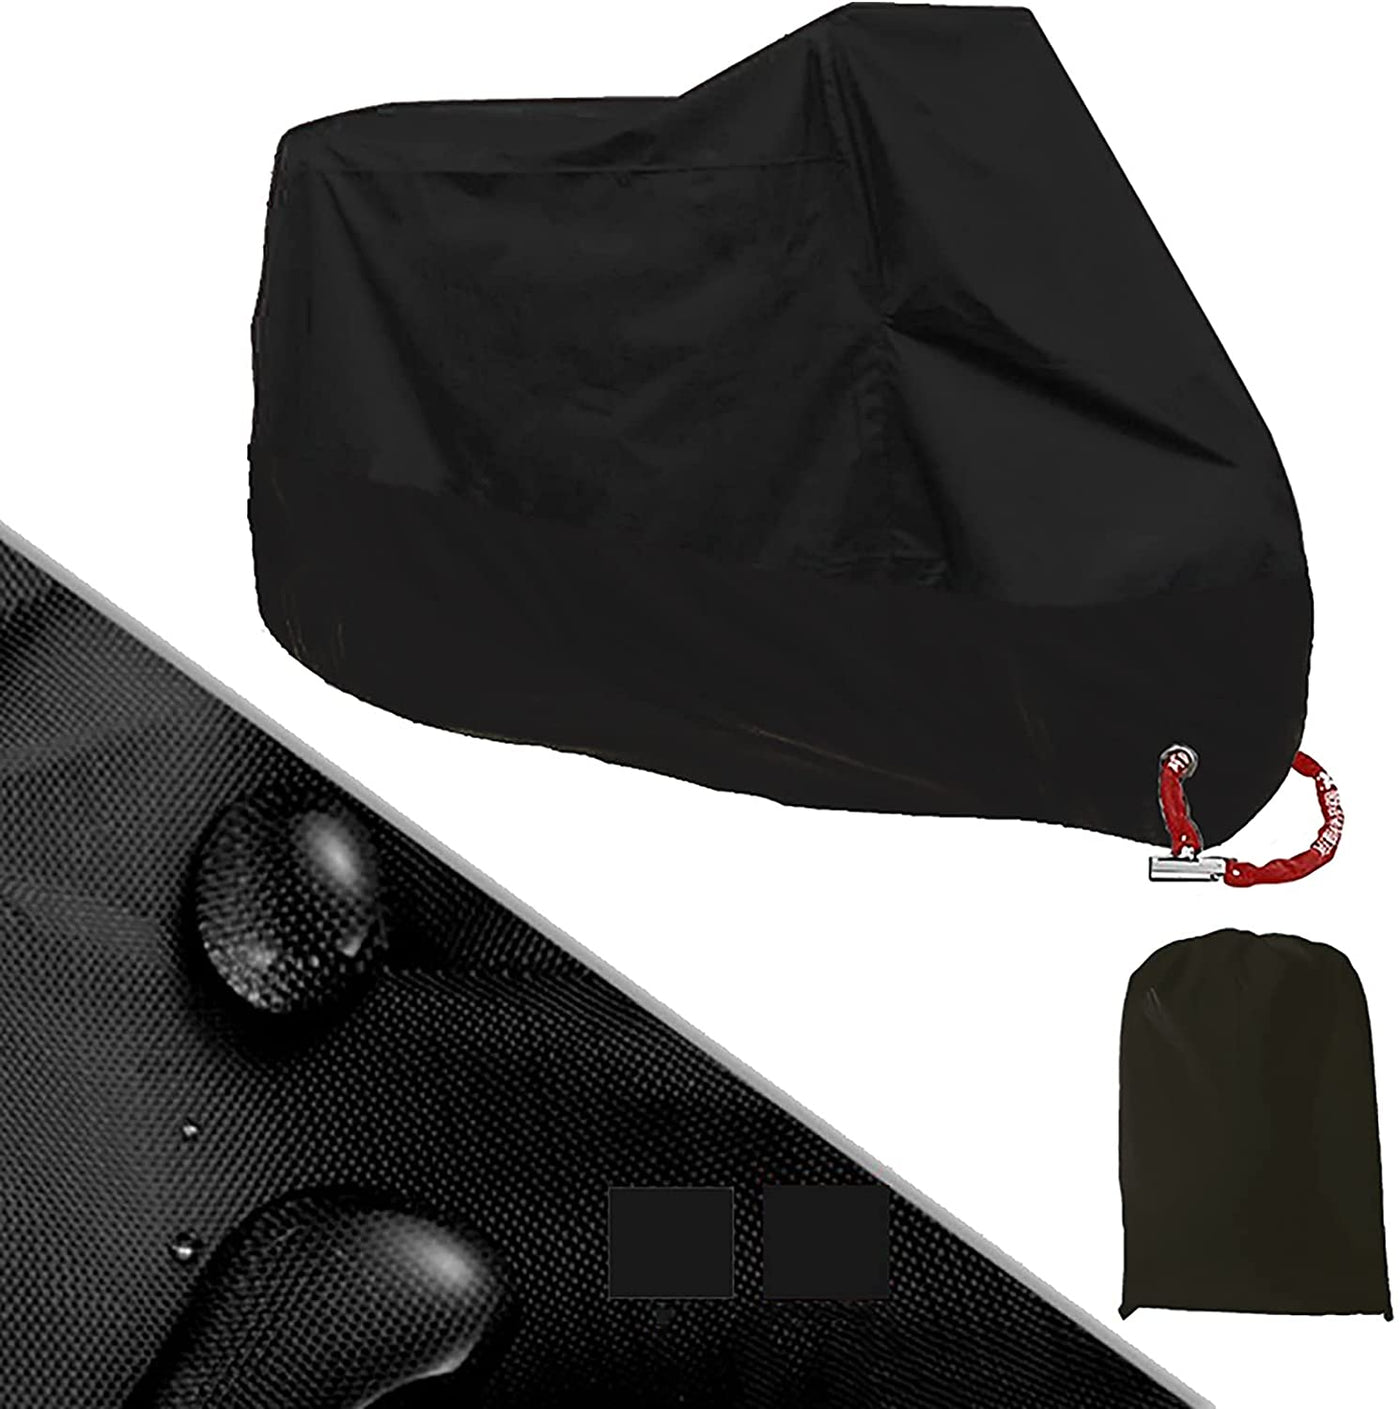 A Waterproof Motorcycle Cover with a rain cover and a bag.